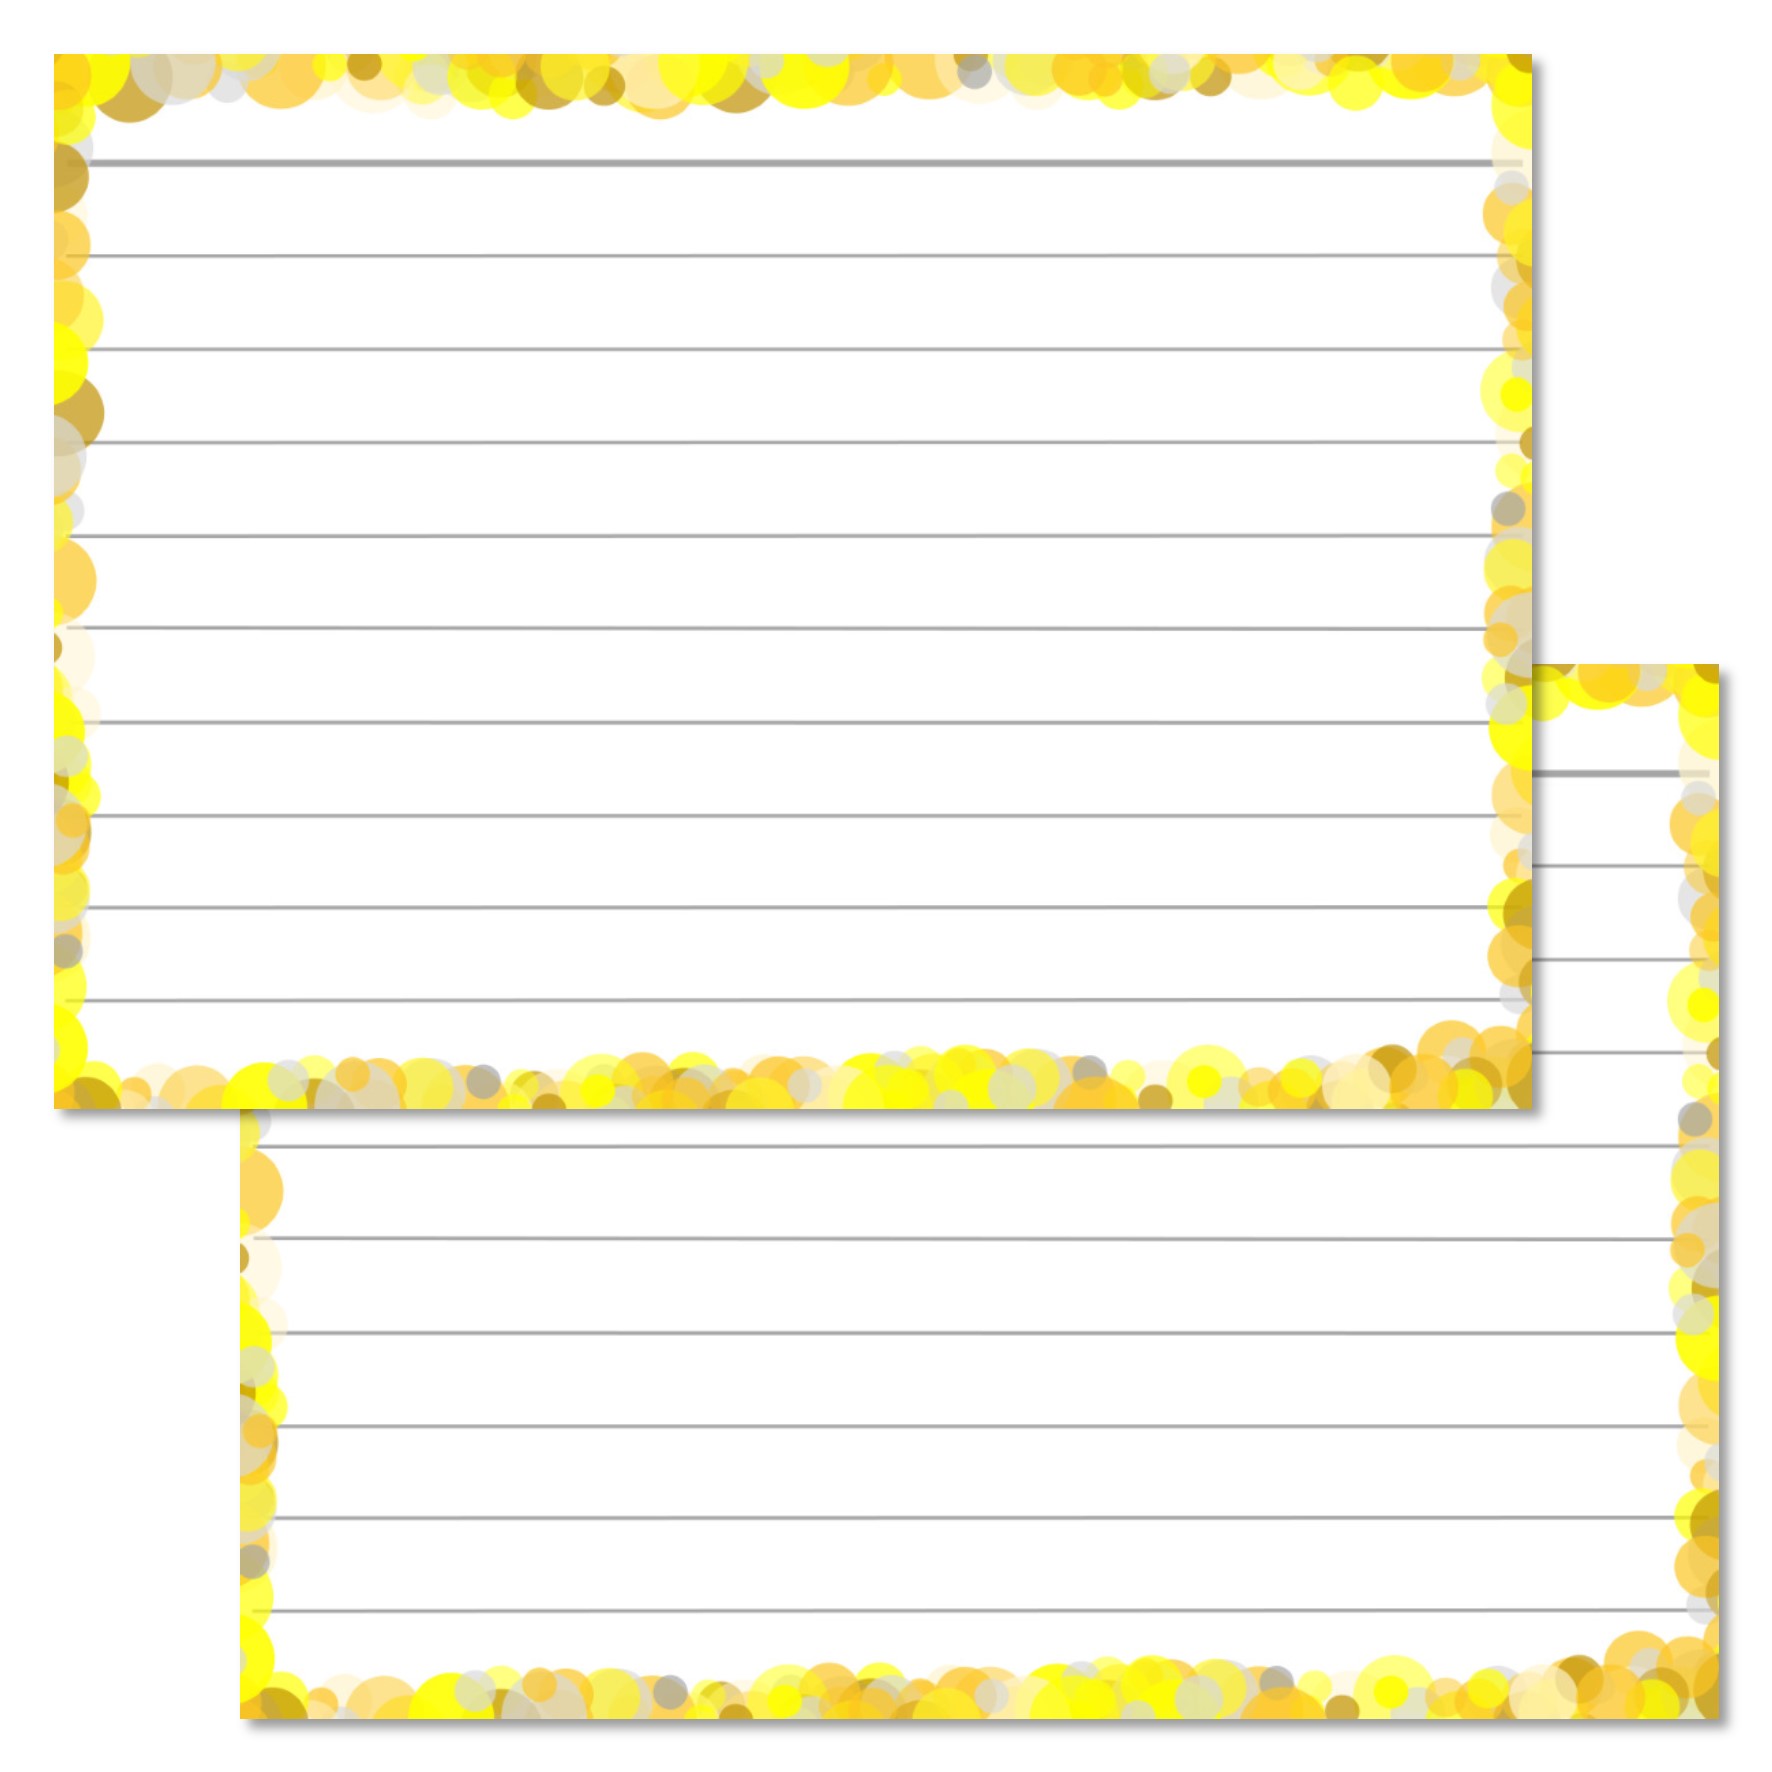 Yellow Confetti Leitner Flashcards A7 - The original Leitner Flashcards